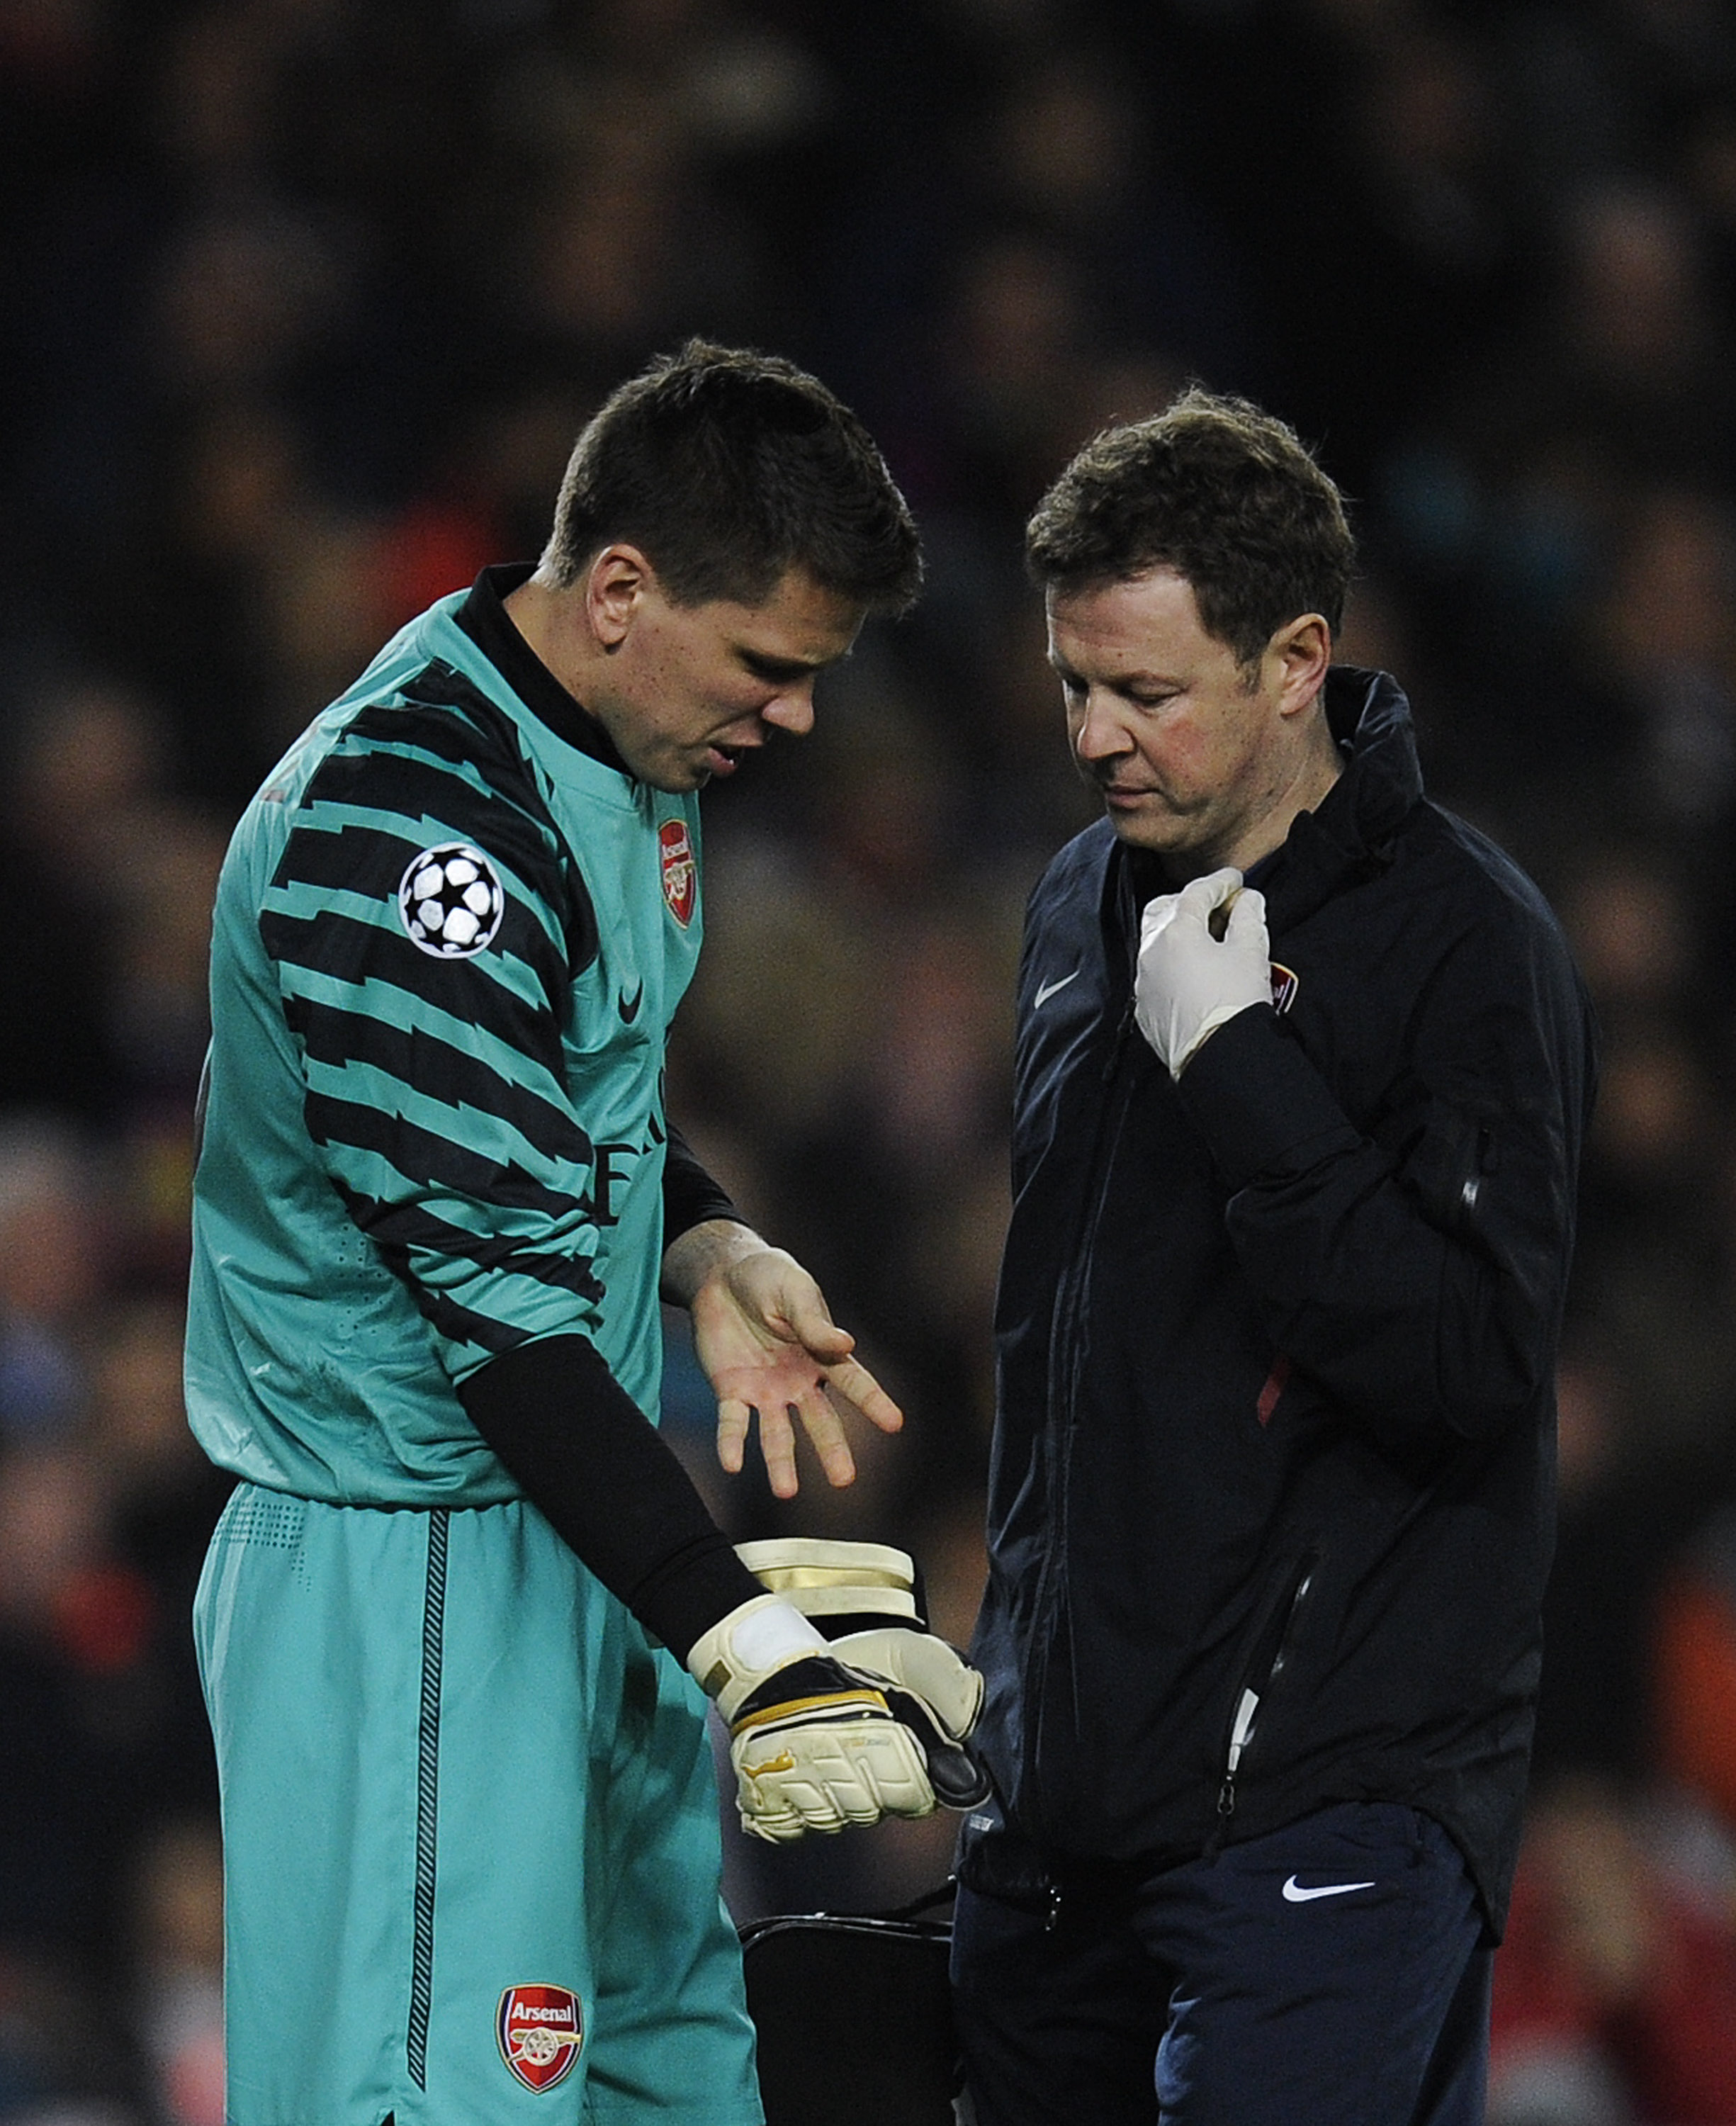 BARCELONA, SPAIN - MARCH 08:  Wojciech Szczesny of Arsenal (L) receives treatment from a medic during the UEFA Champions League round of 16 second leg match between Barcelona and Arsenal at the Camp Nou stadium on March 8, 2011 in Barcelona, Spain.  Barce